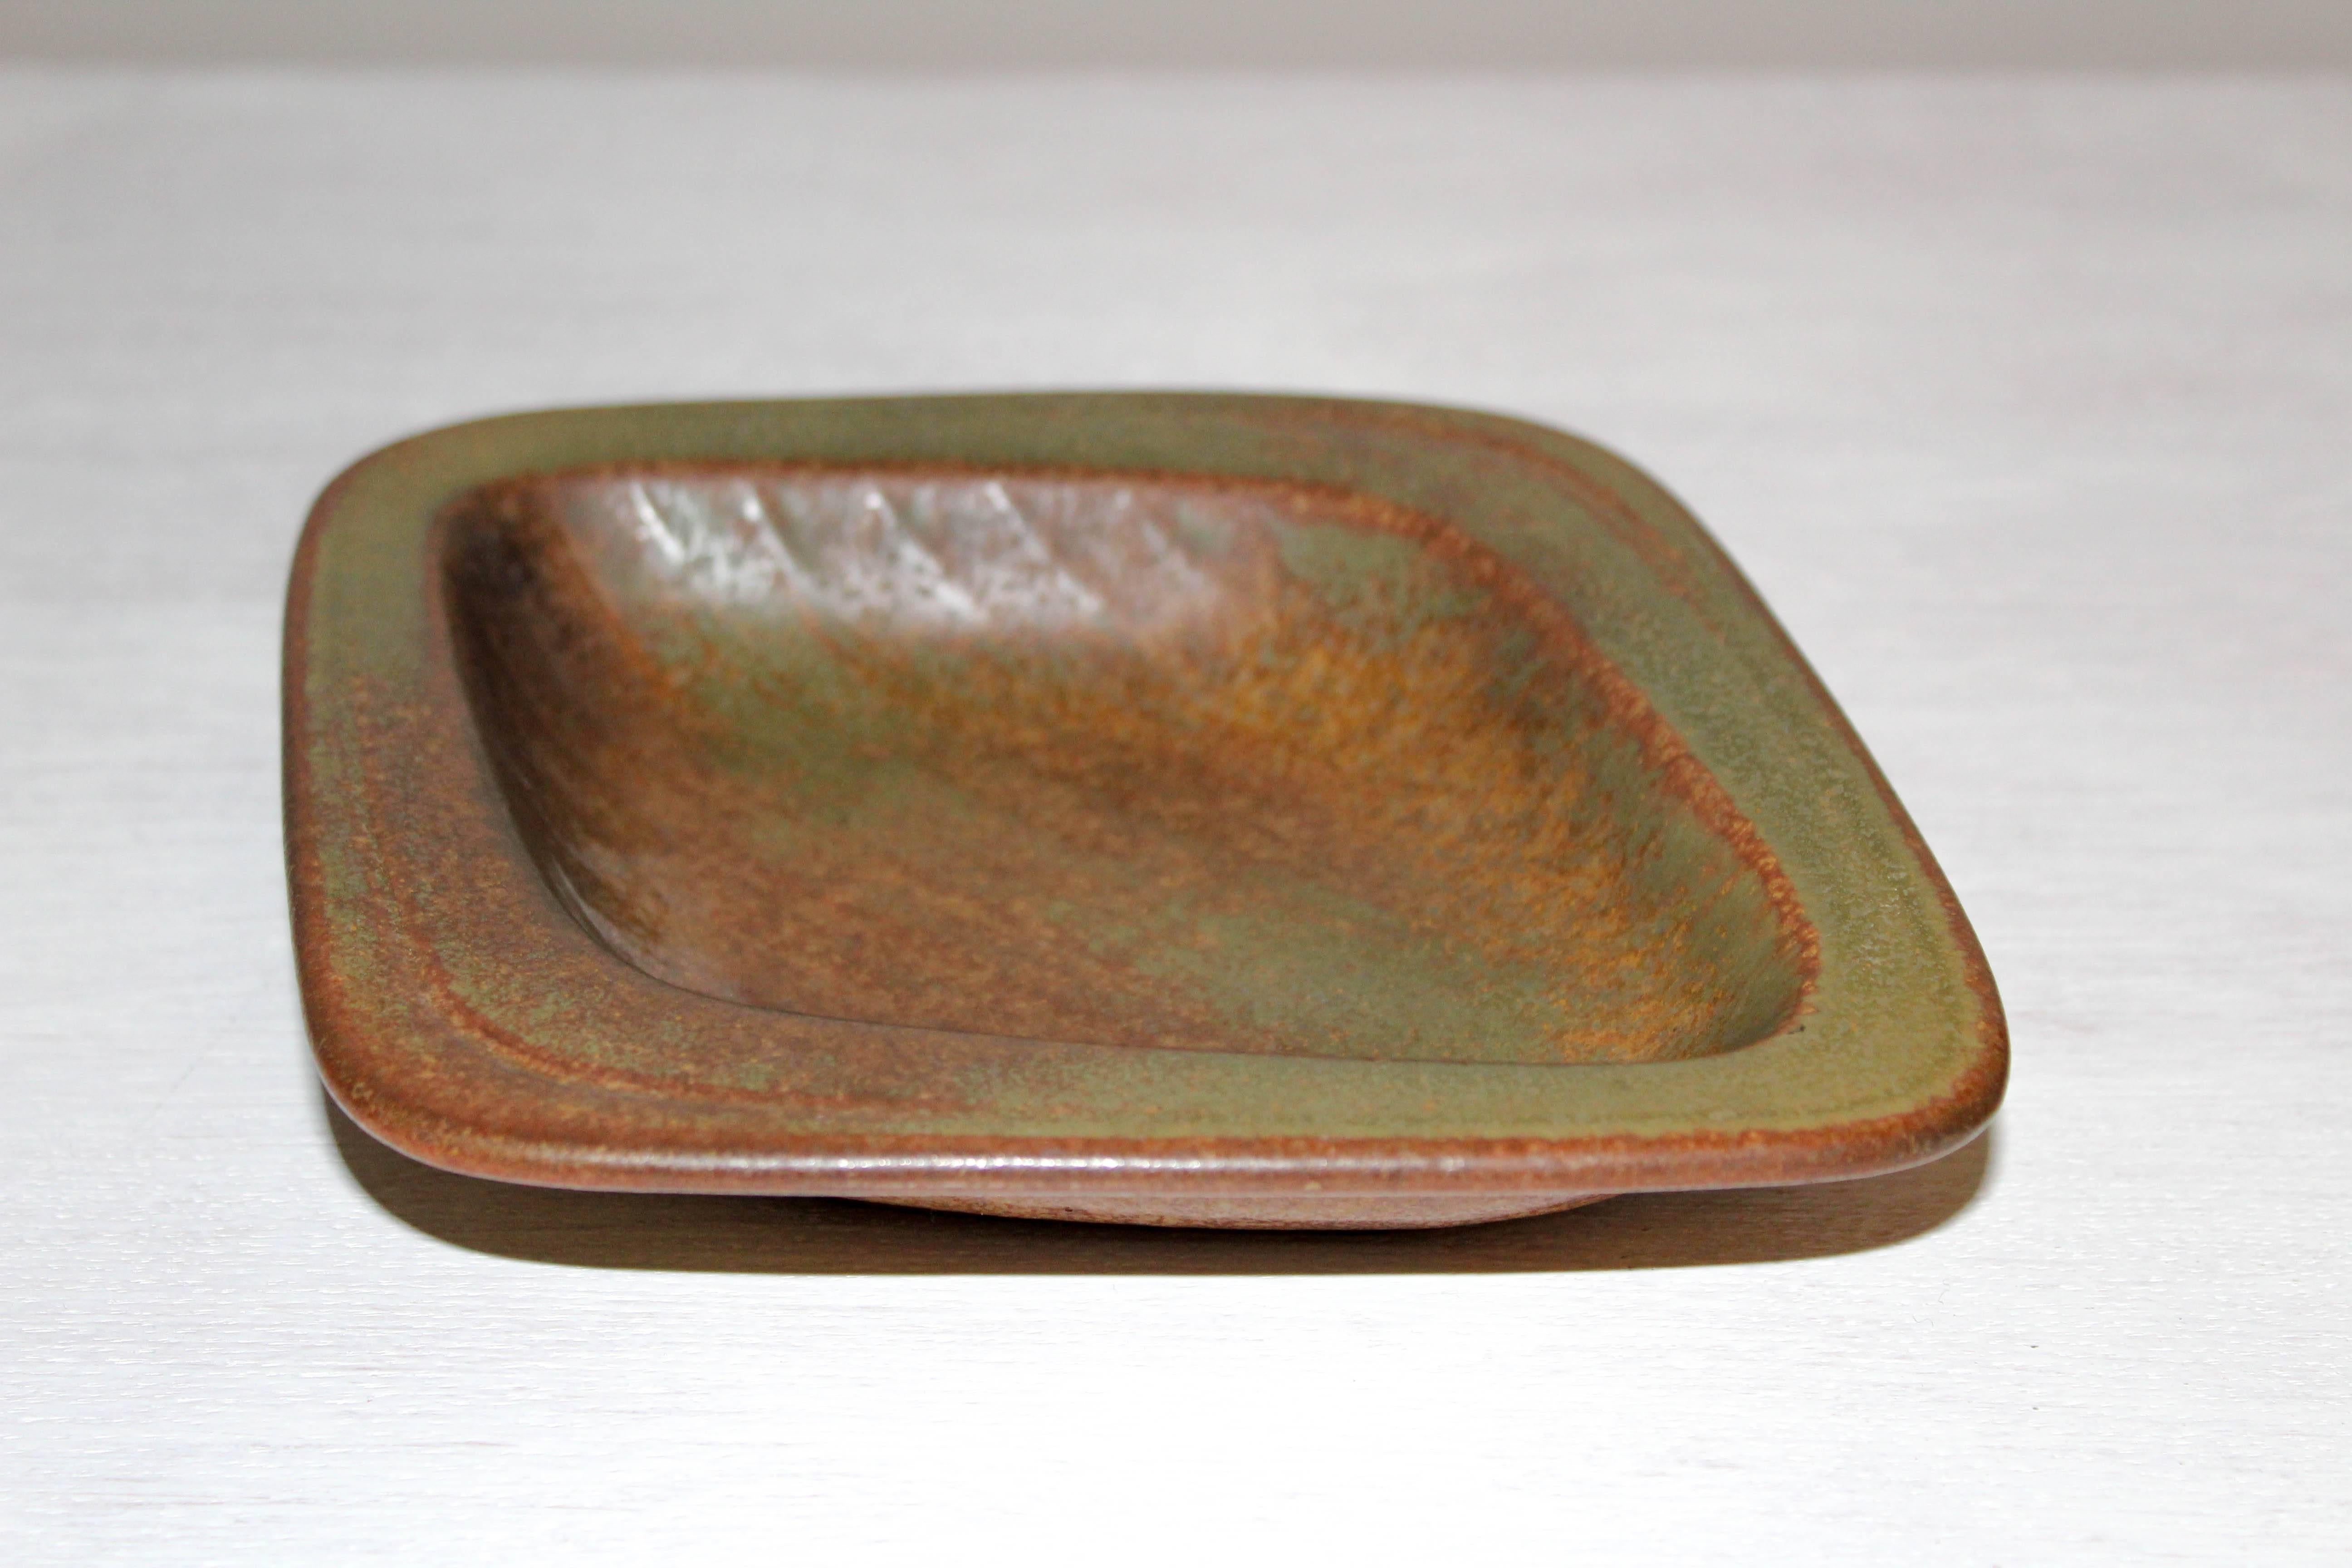 Ceramic tray made by Swedish designer Gunnar Nylund for Rörstrand. The tray is in excellent vintage condition. Marked GN AUT.